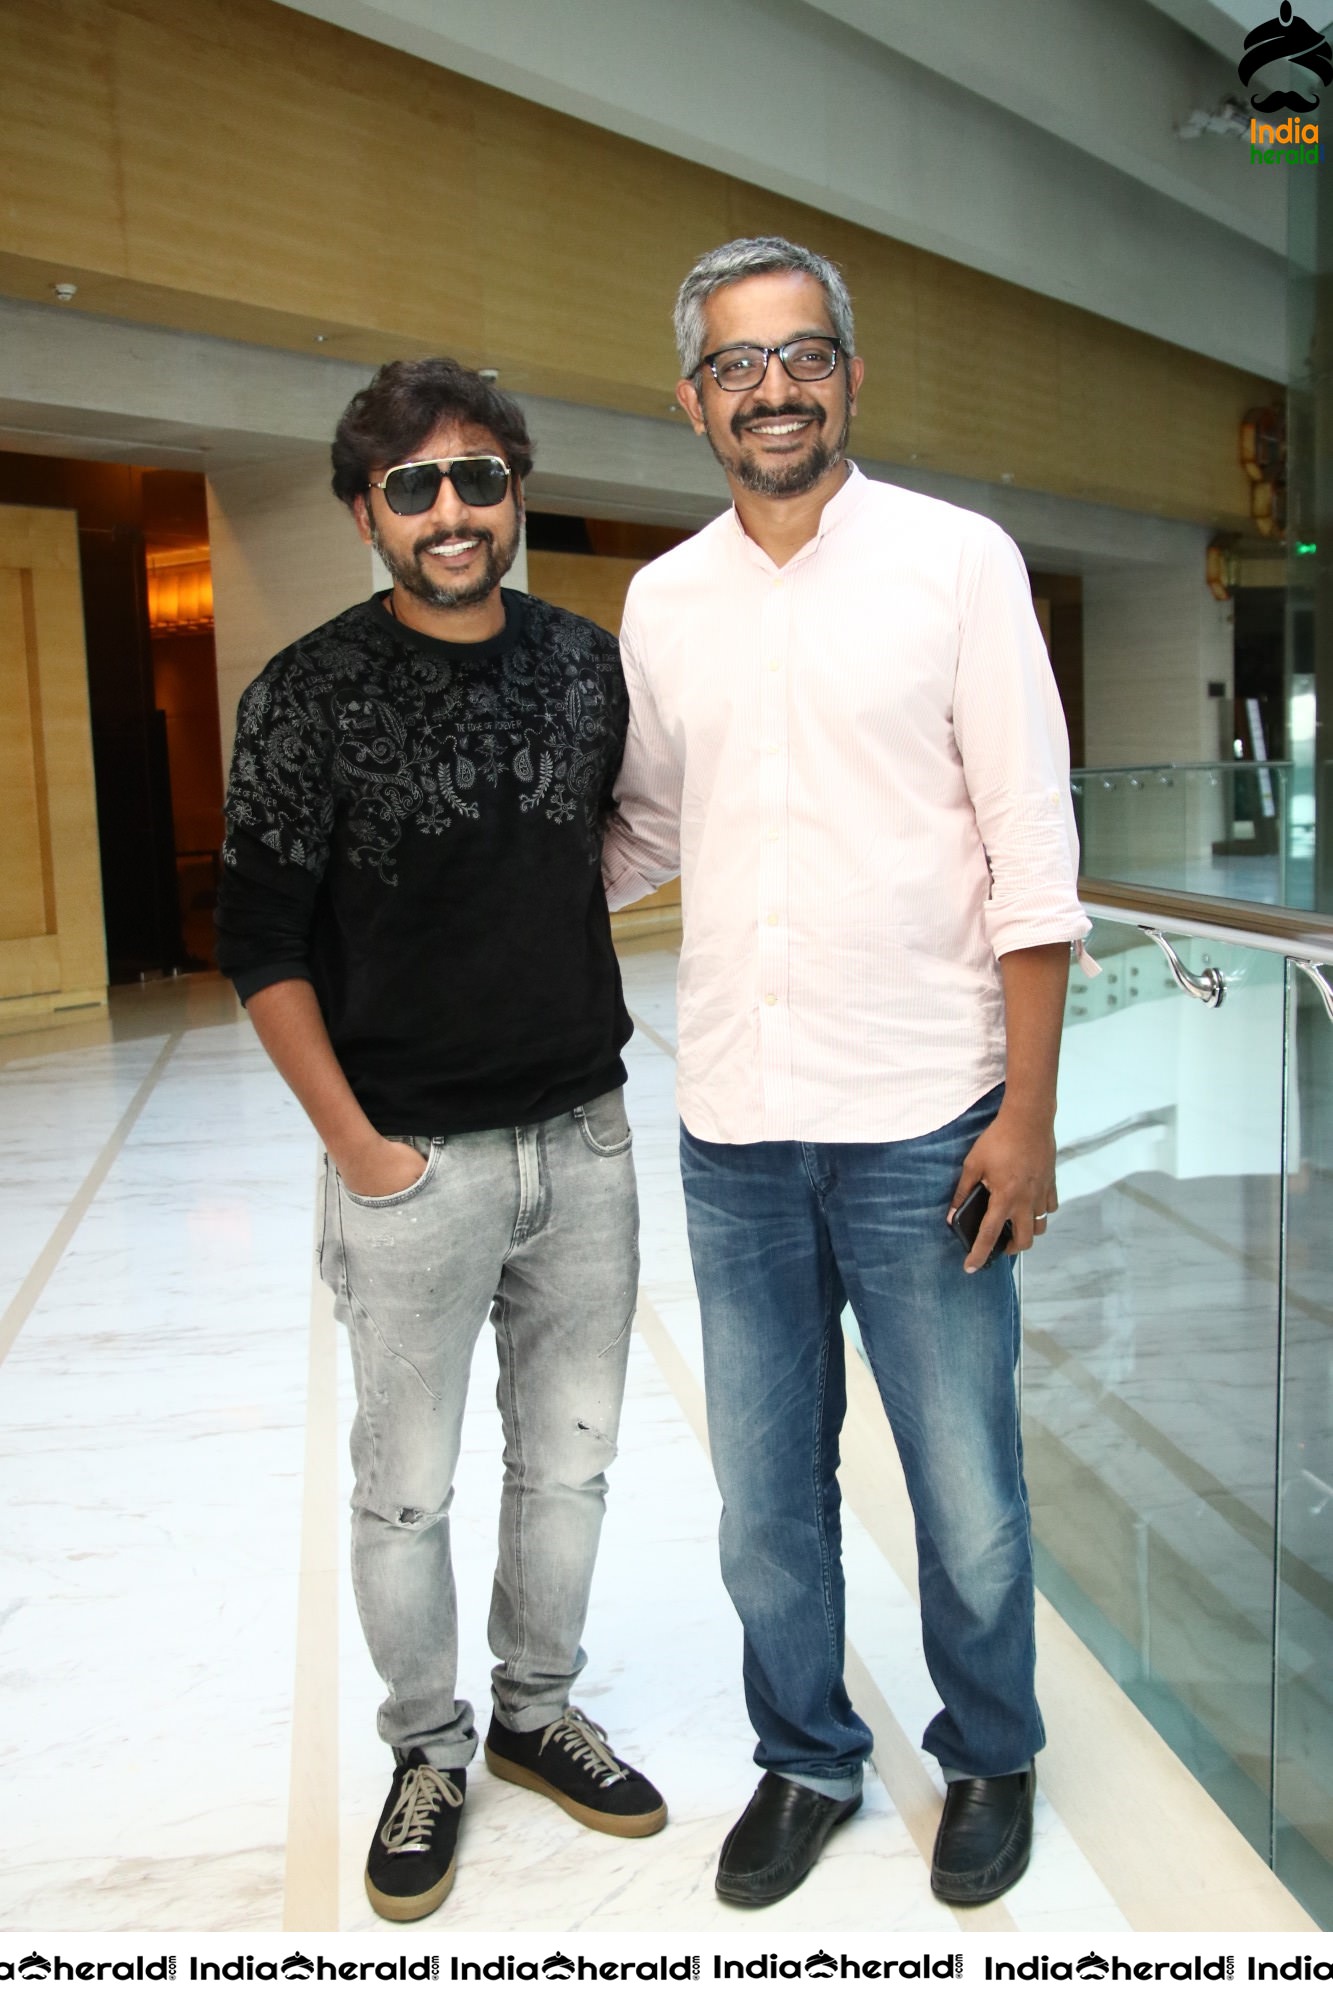 RJ Balaji in Mind Voice Podcast launched